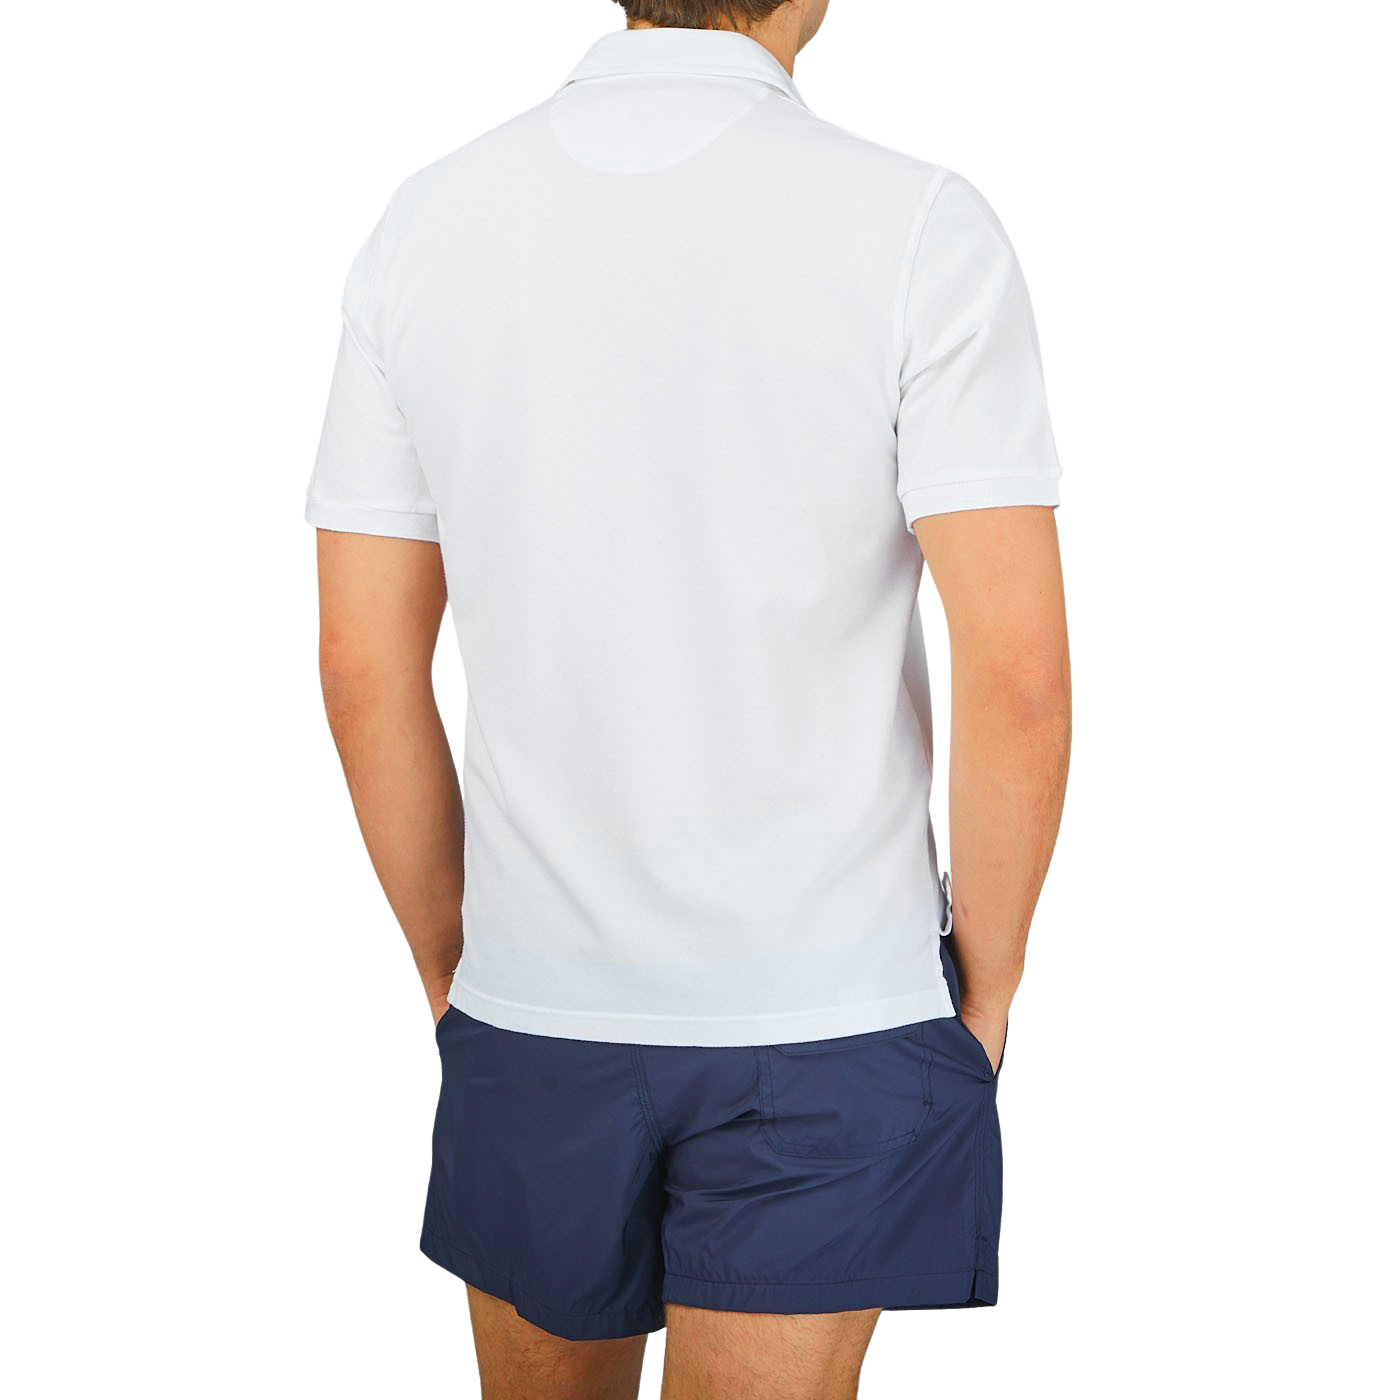 The back view of a man wearing a Fedeli washed white cotton pique polo shirt with a washed finish and blue shorts.